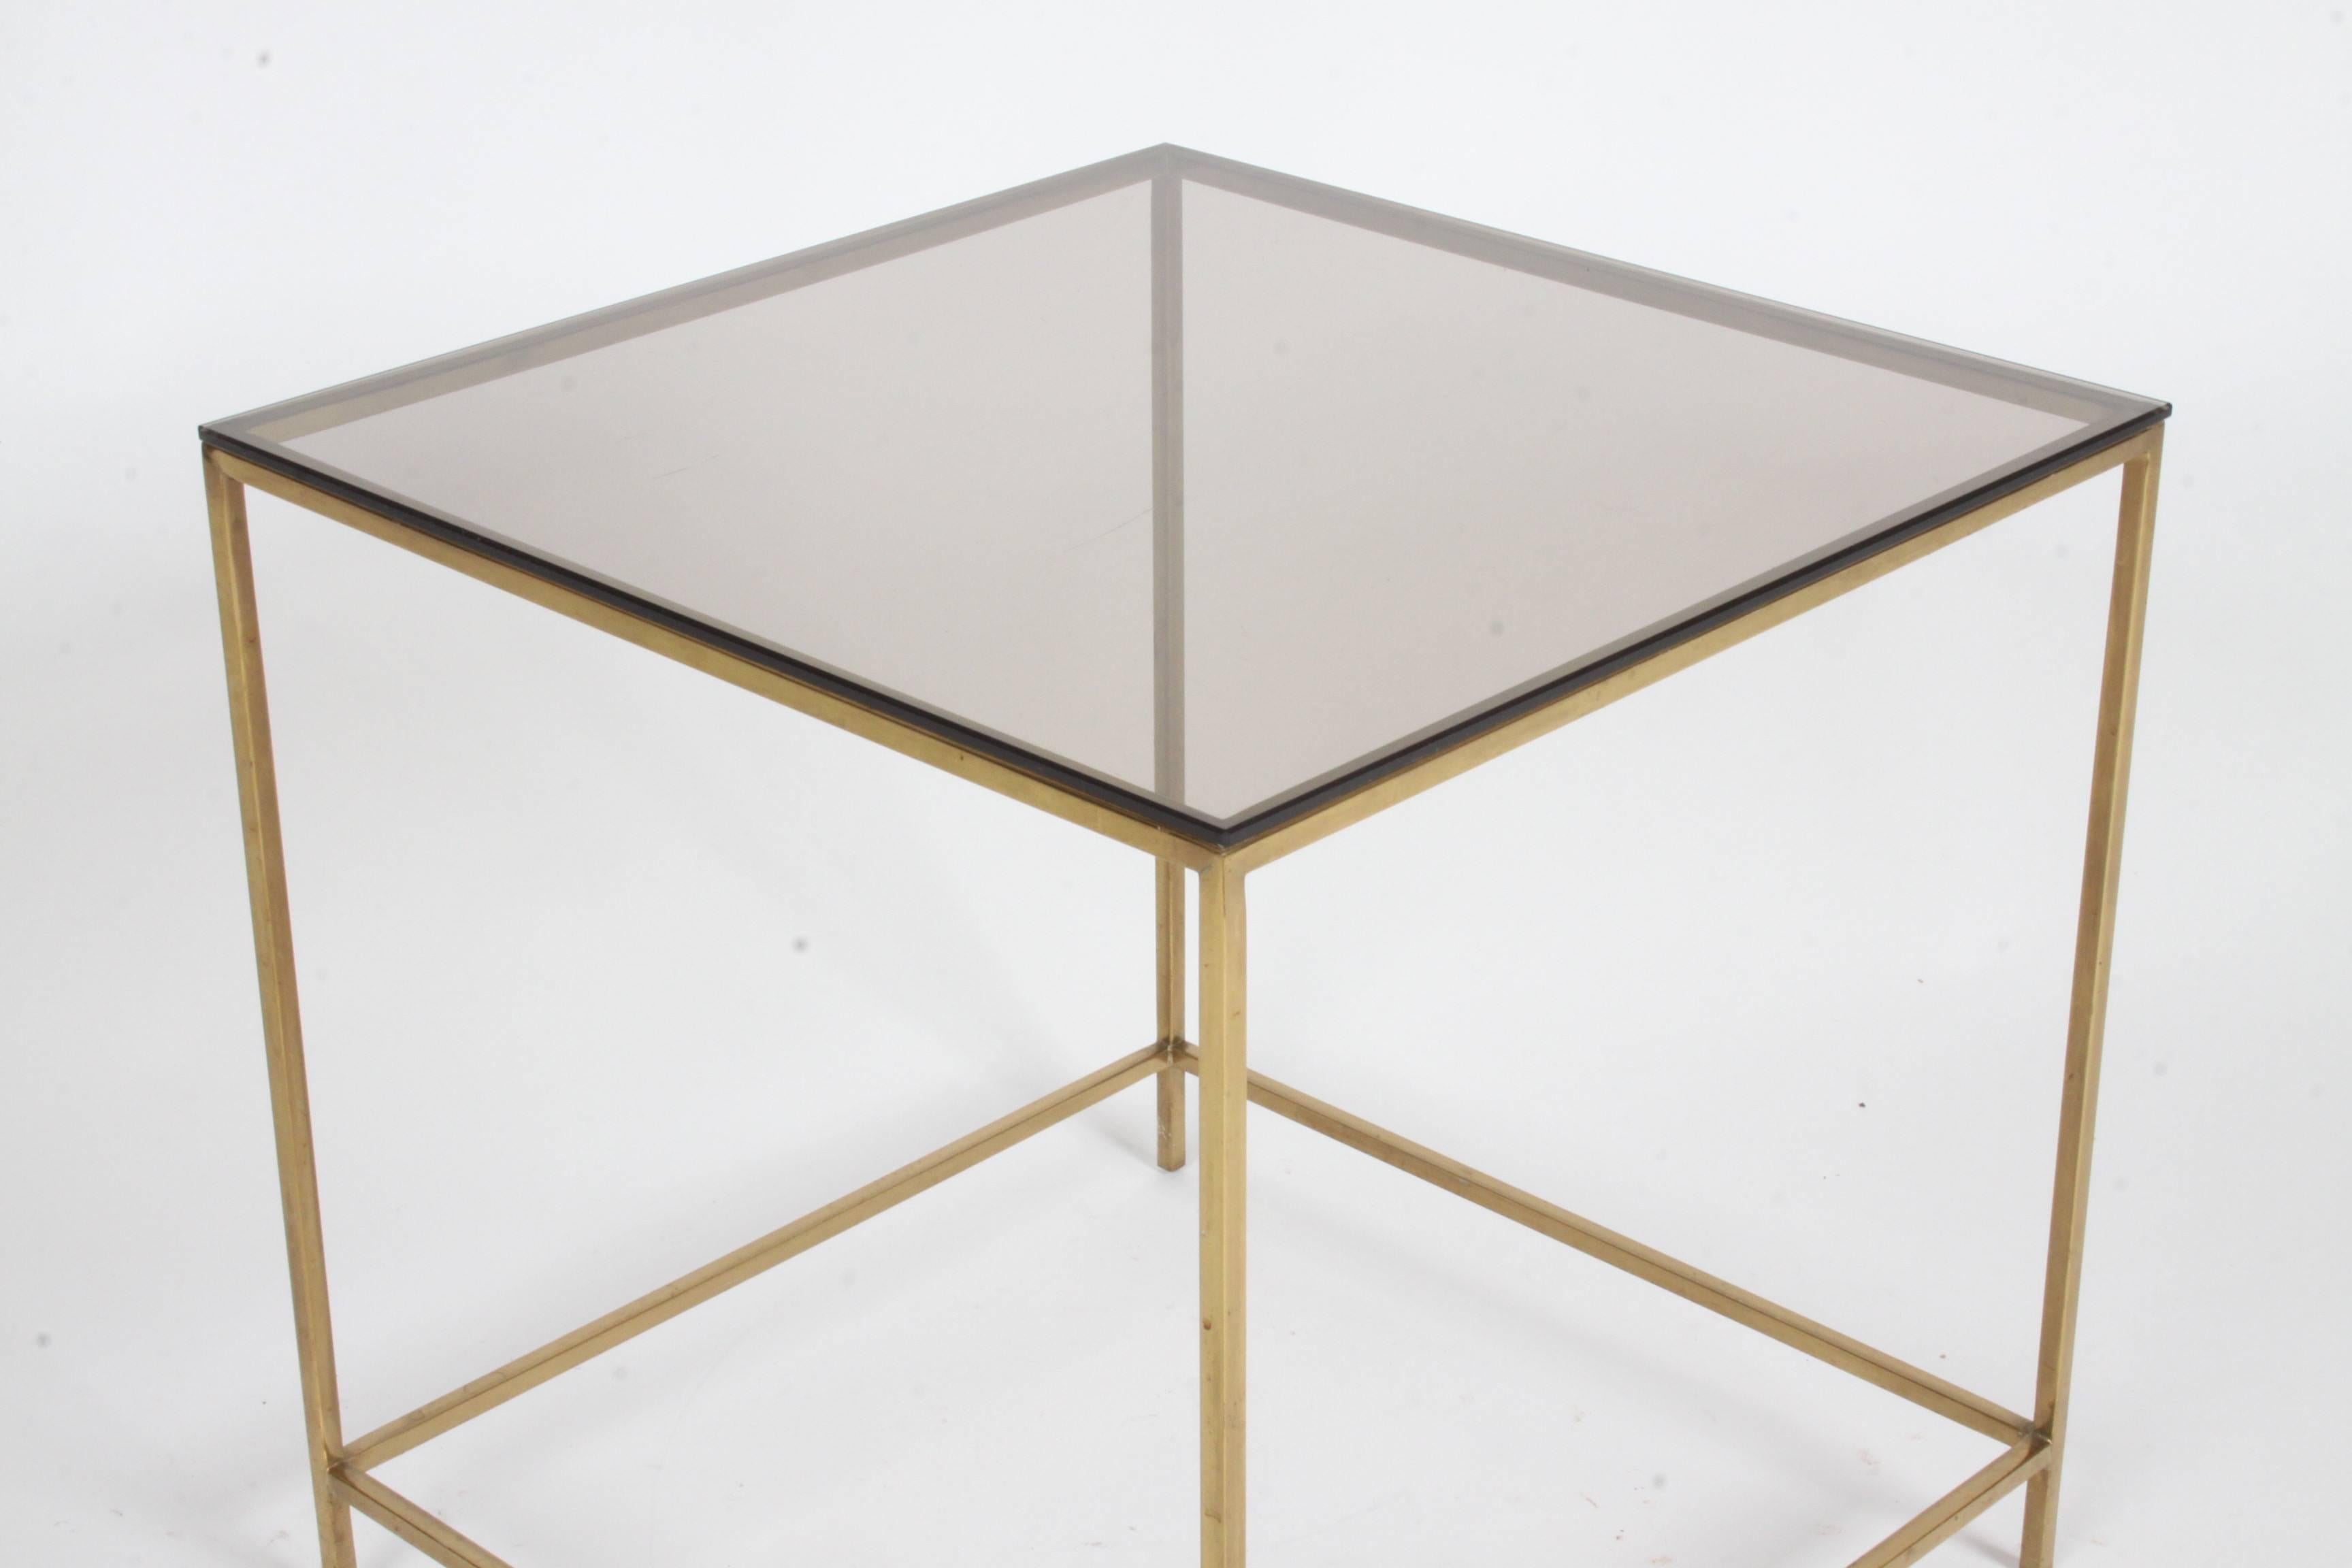 American Mid-Century Modern Brass & Bronze Glass Side Table, circa 1970s For Sale